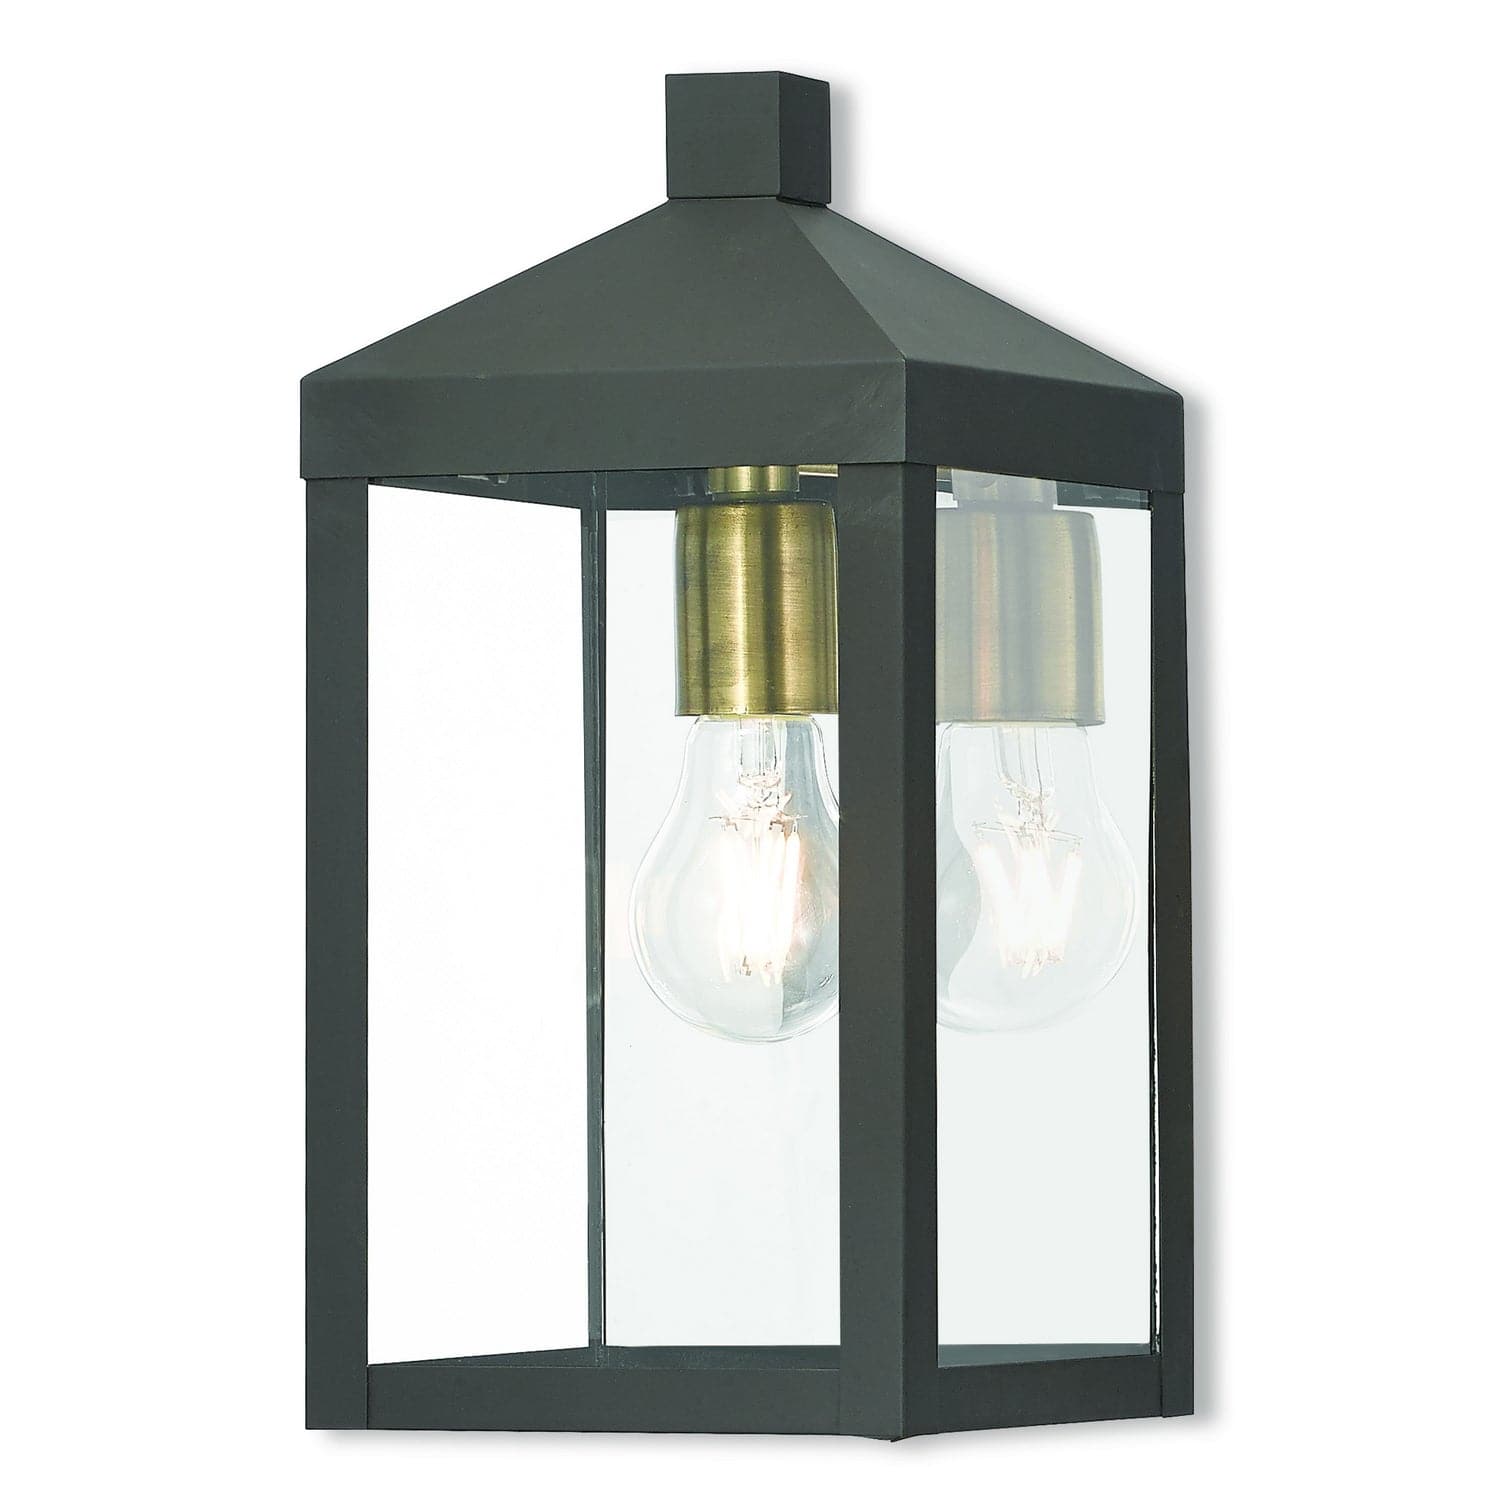 Livex Lighting - 20582-07 - One Light Outdoor Wall Lantern - Nyack - Bronze w/ Antique Brass Cluster and Polished Chrome Stainless Steel